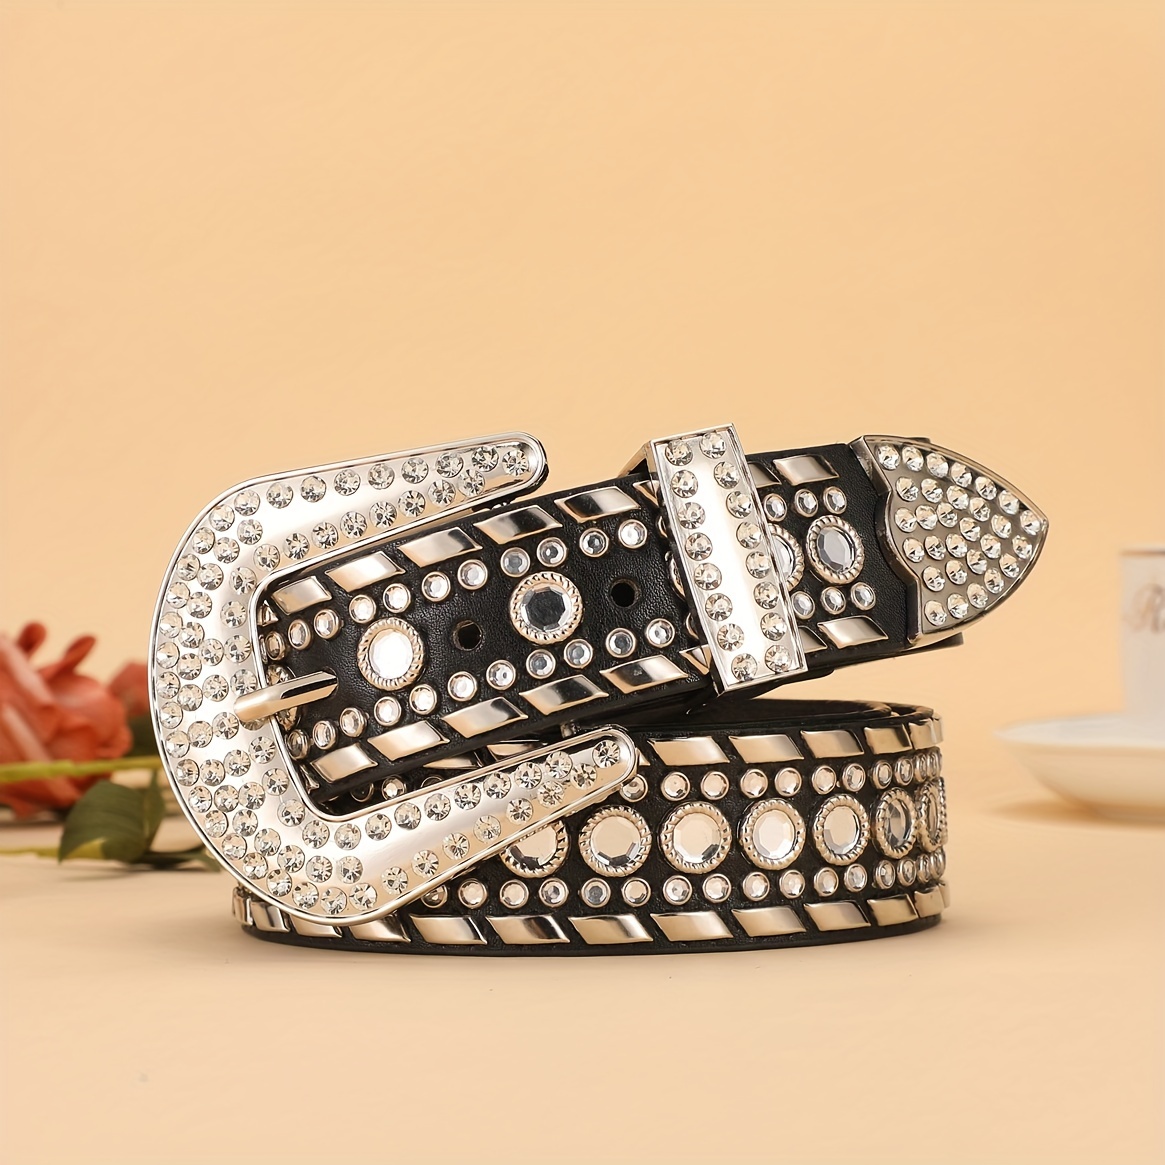 Rhinestone Belt for Men and Women, Western Cowgirl Cowboy Bling Studded  Diamond Belt Faux Leather Belt for Jeans Pants Dress at  Women’s